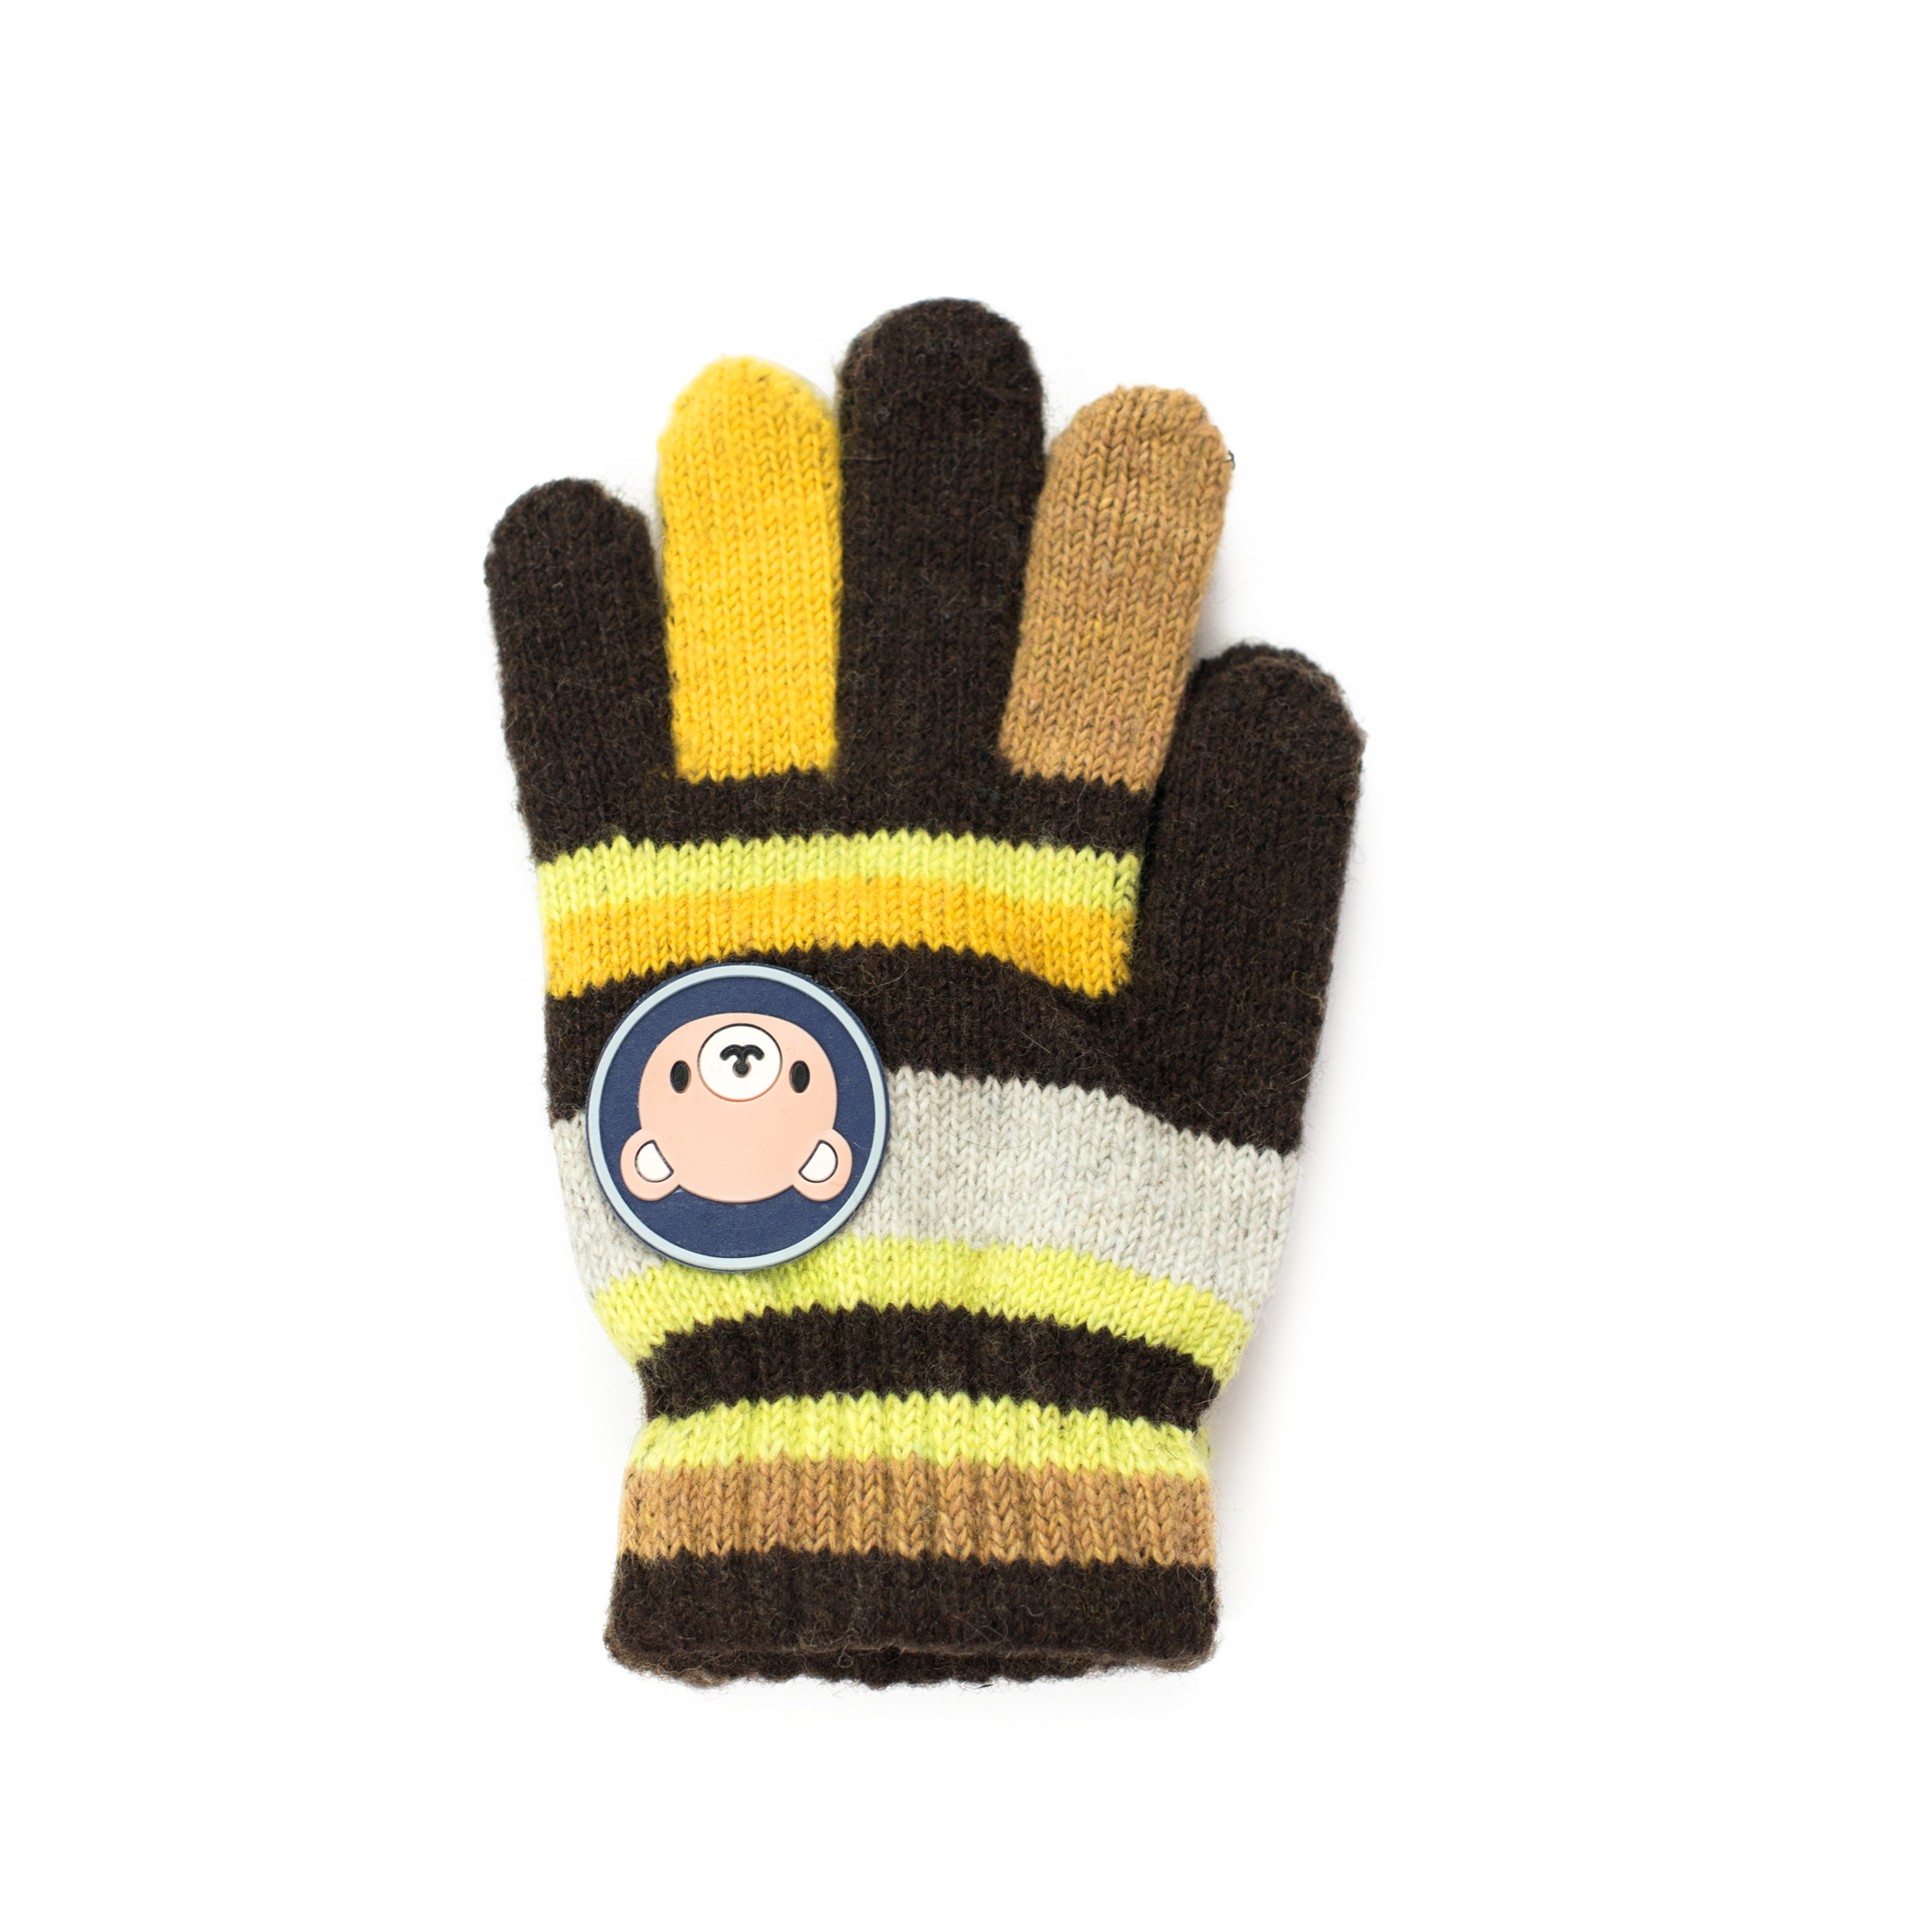 Art Of Polo Kids's Gloves Rkq054-5 Brown/Yellow